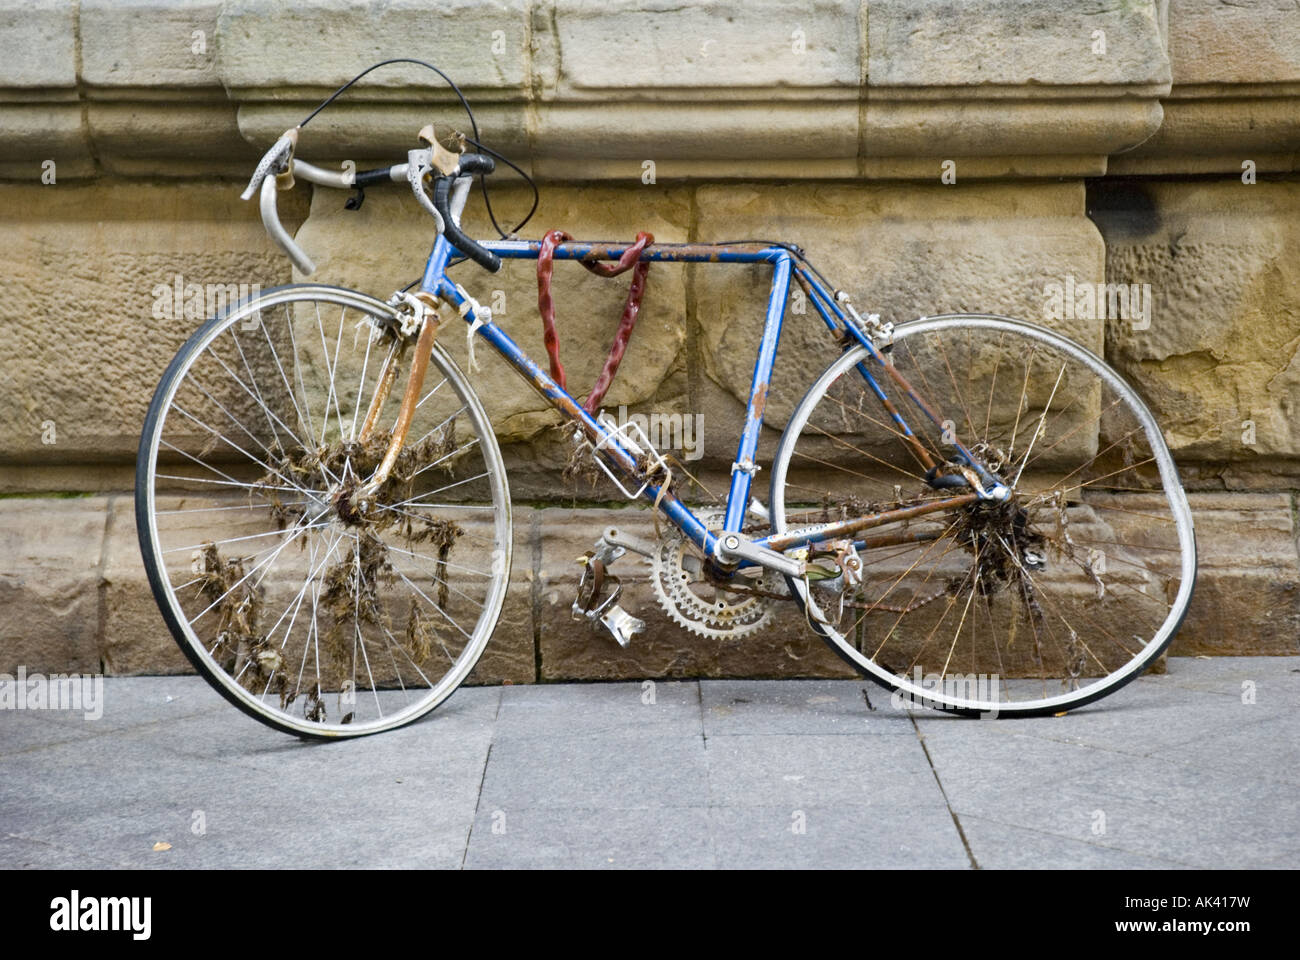 An old racing bicycle leans abandoned against a stone wall in San Sebastian's Old Town, Spain. Stock Photo